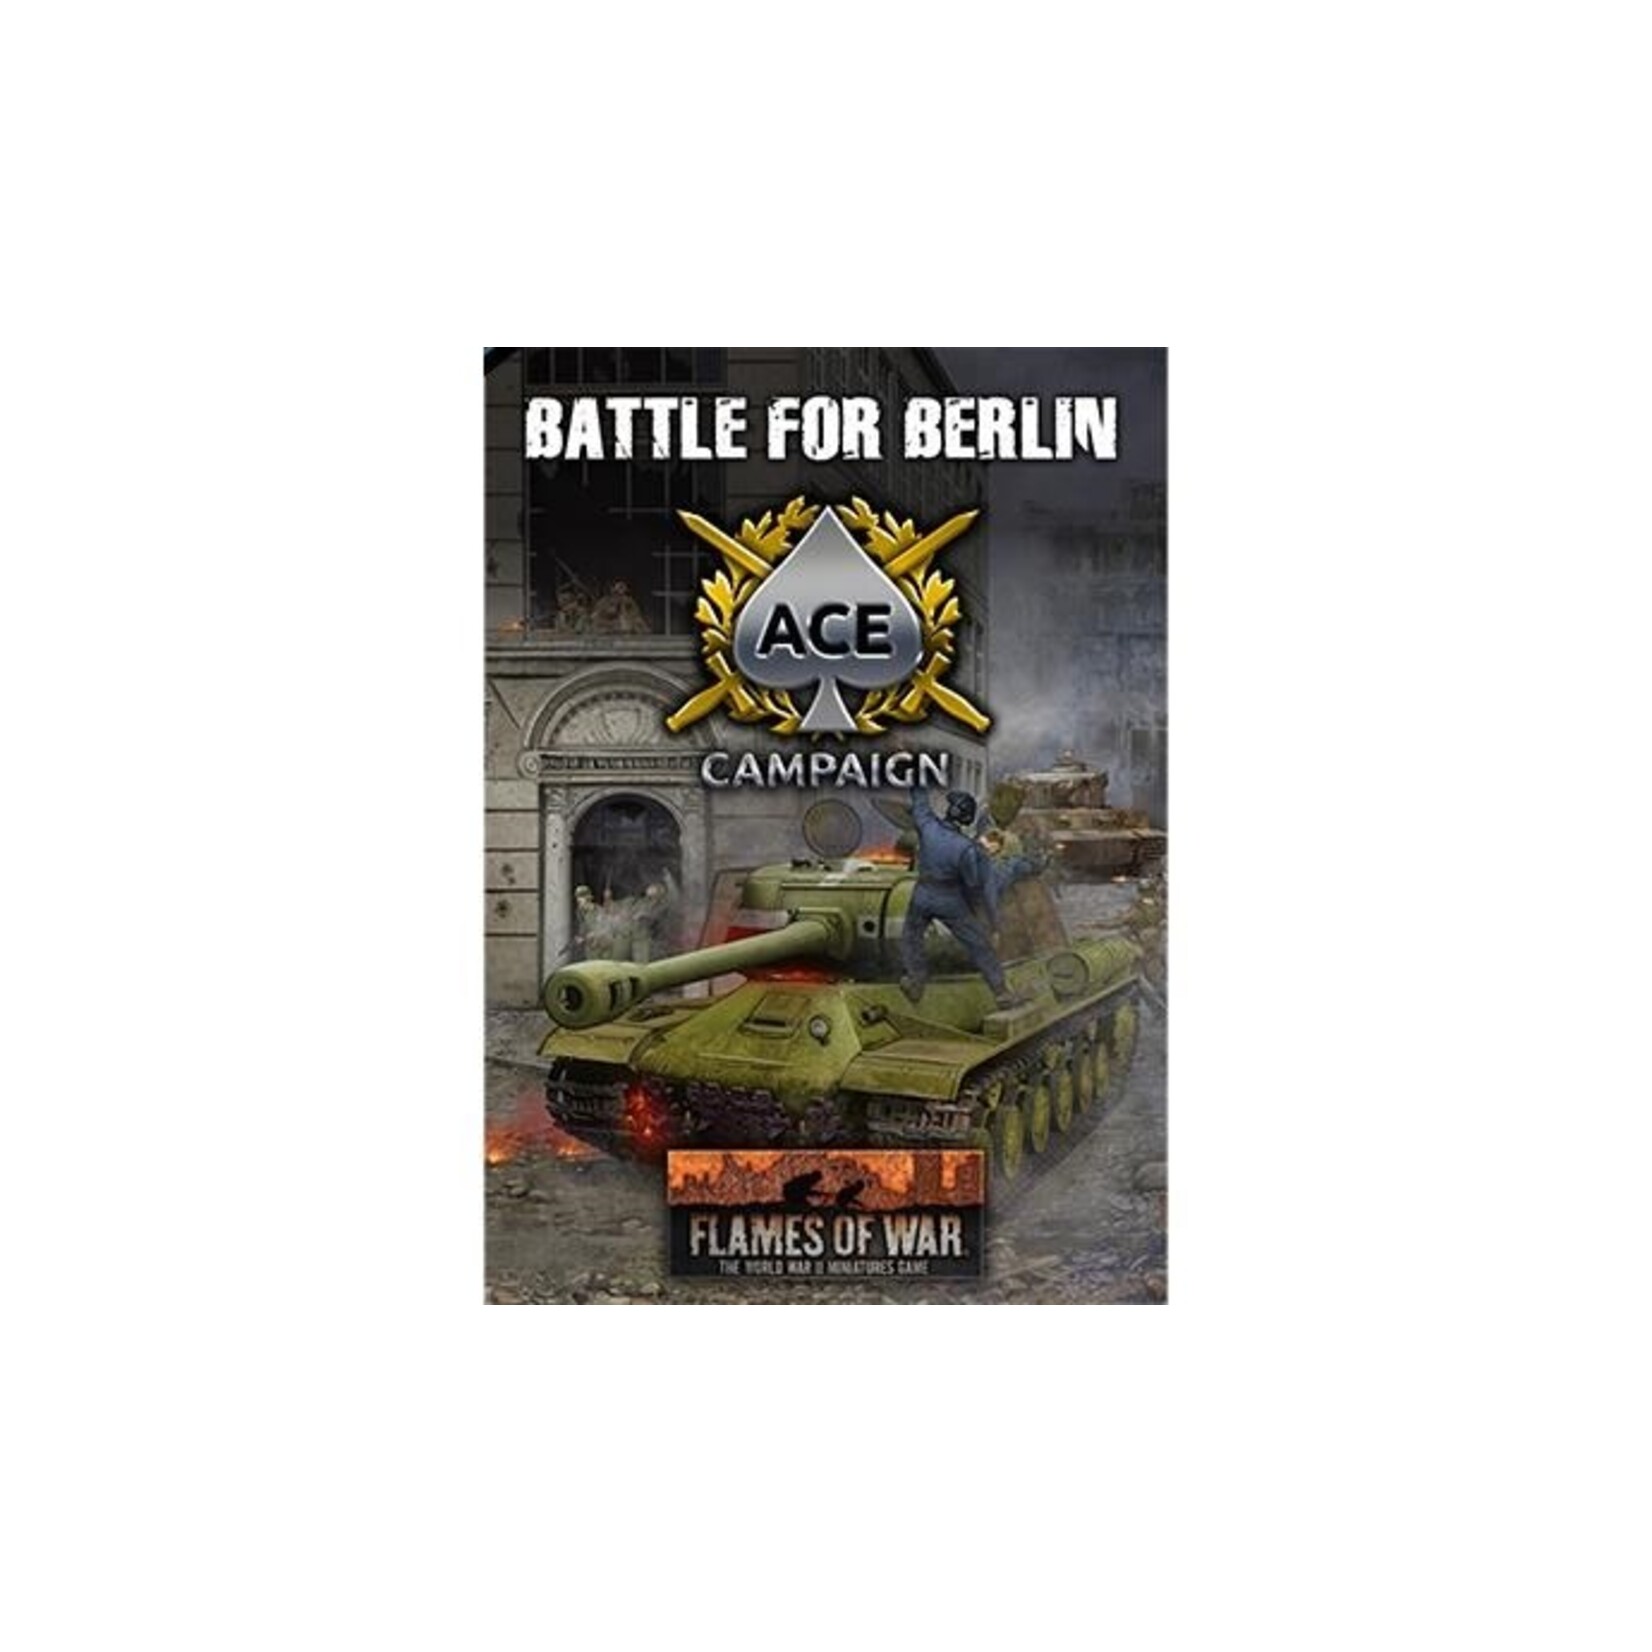 Flames of War Flames of War: Battle for Berlin Ace Campaign